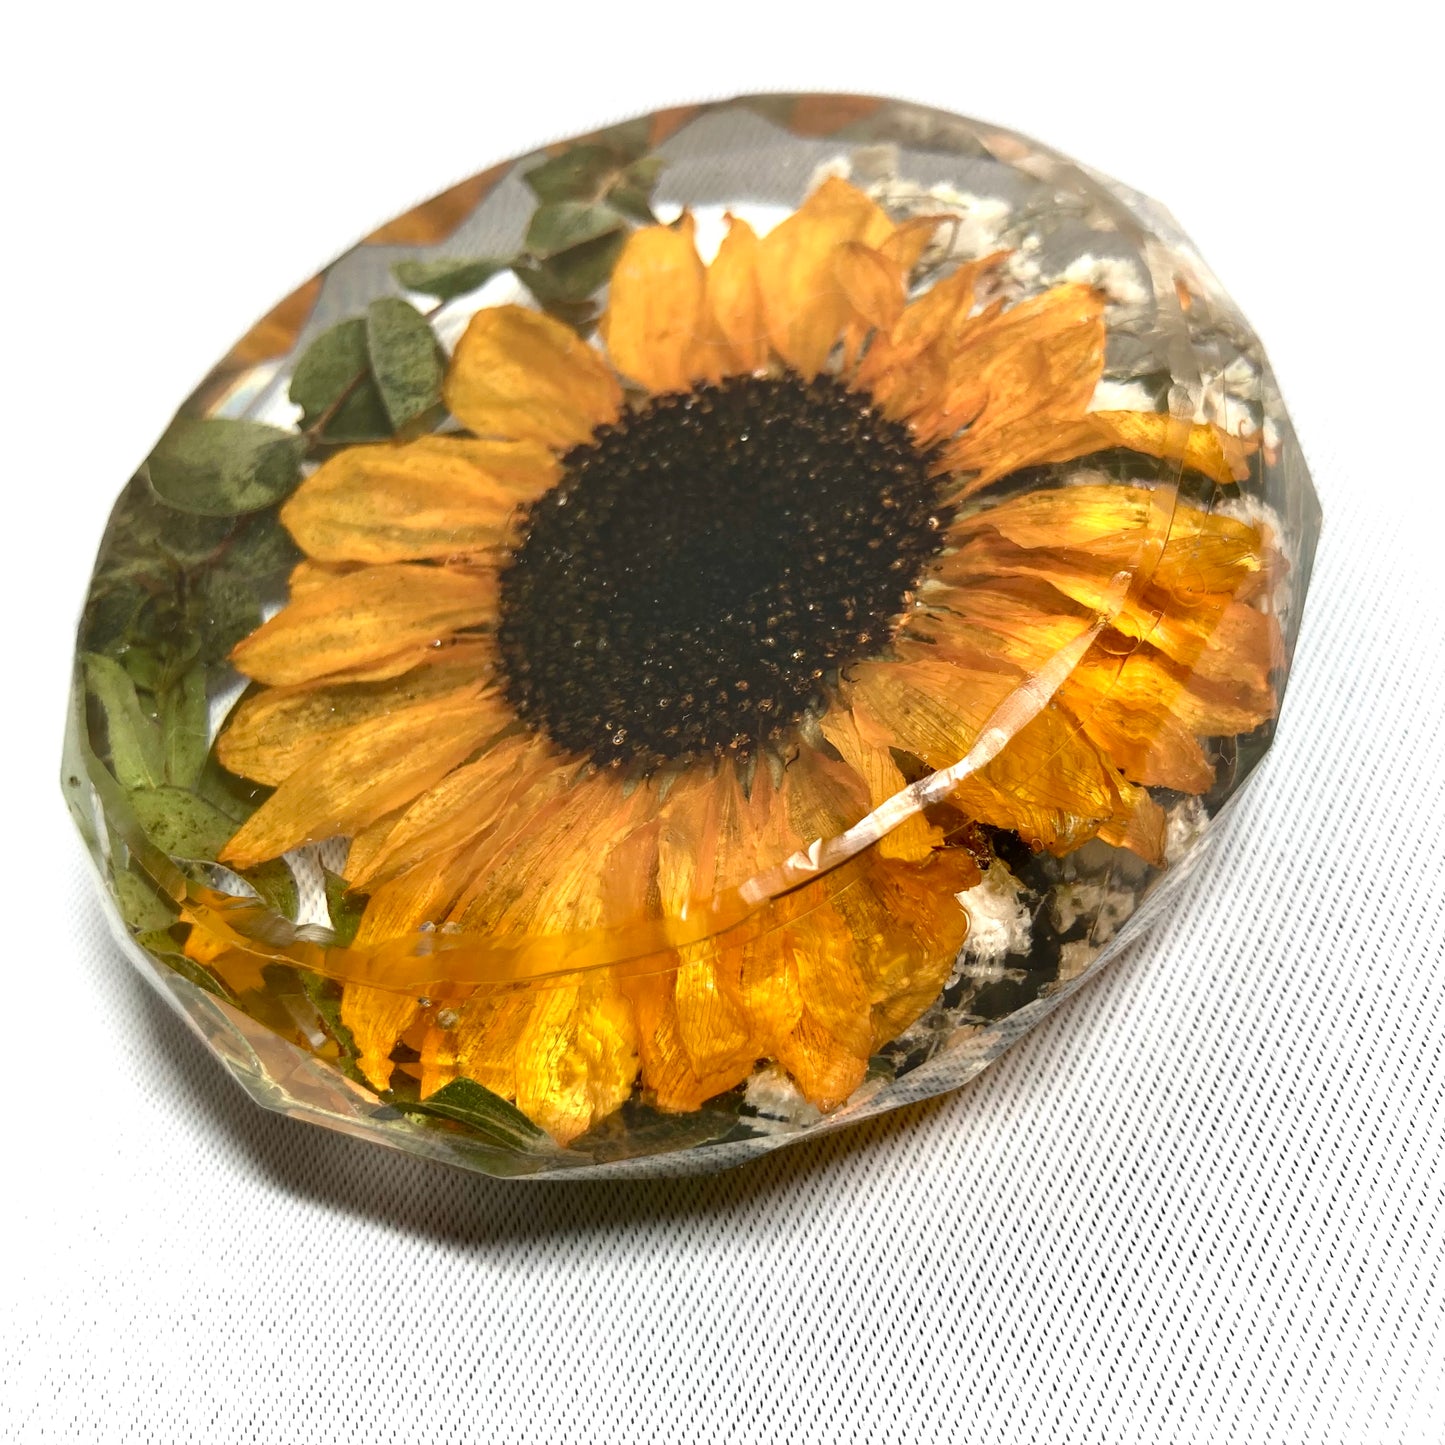 Flower Preservation faceted coasters